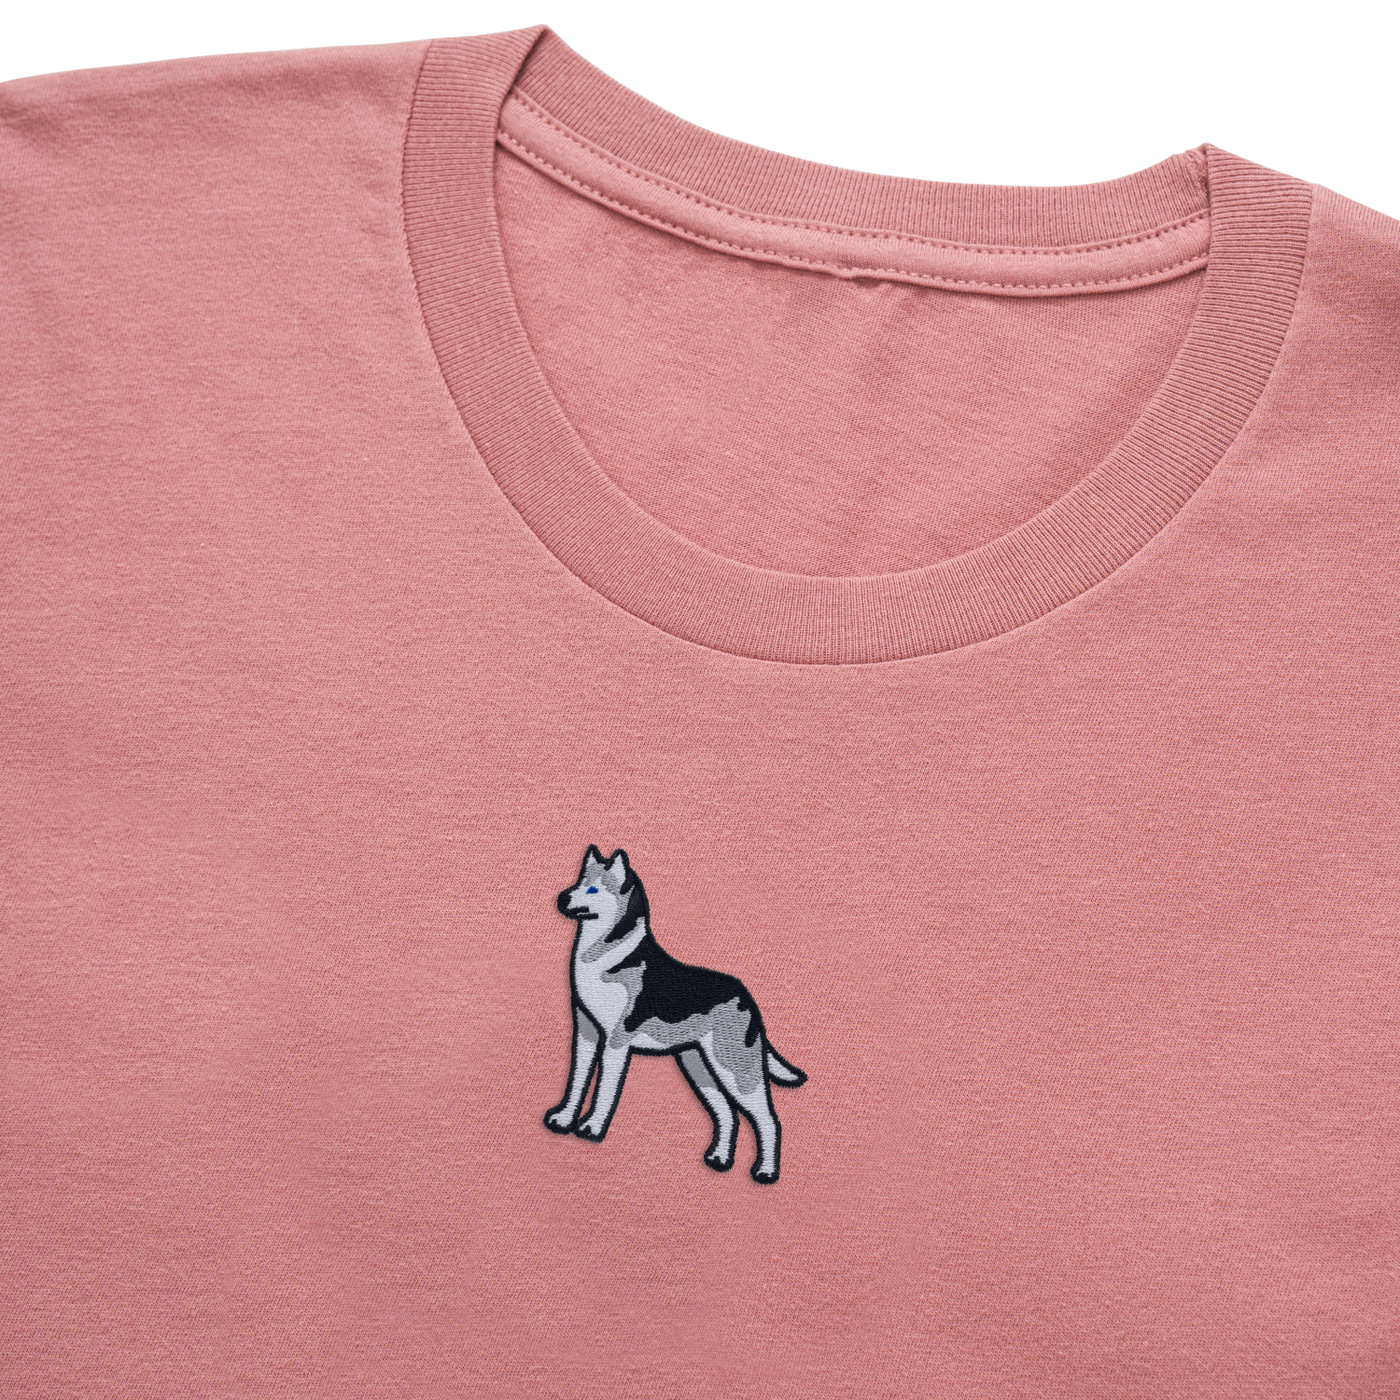 Bobby's Planet Women's Embroidered Siberian Husky T-Shirt from Paws Dog Cat Animals Collection in Mauve Color#color_mauve